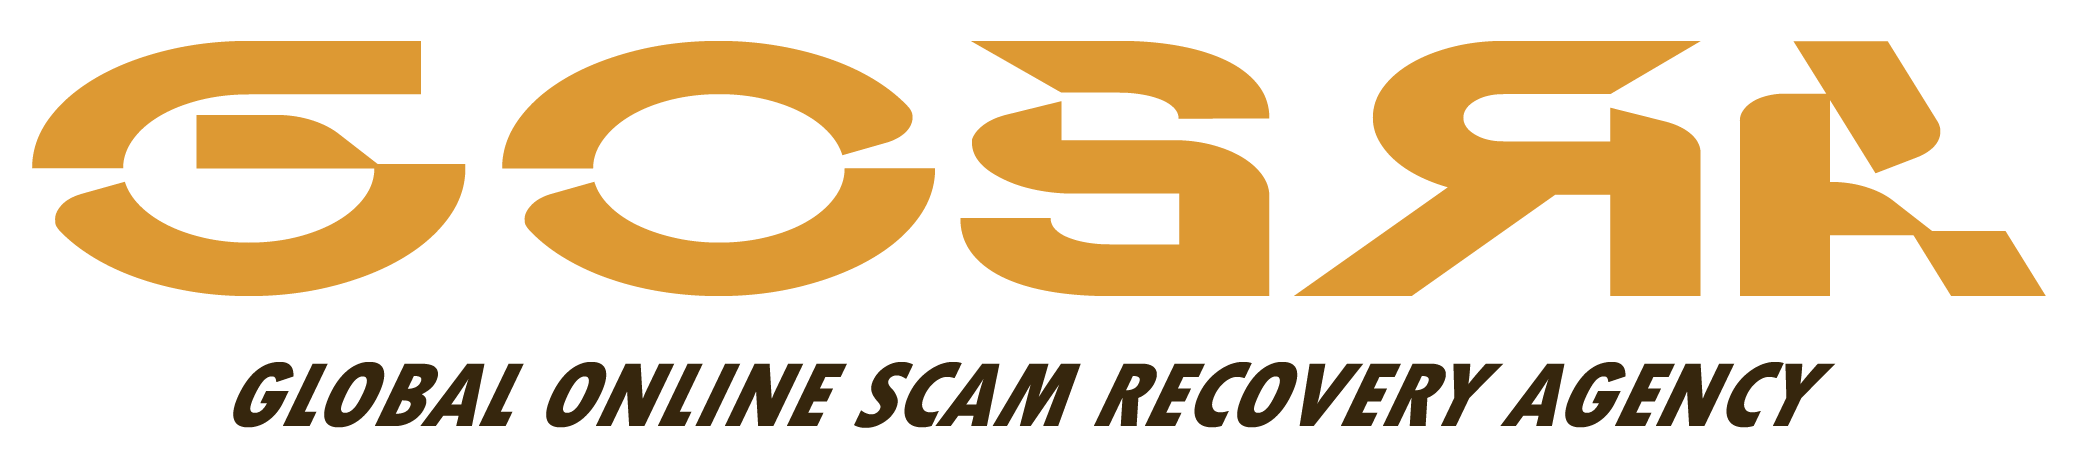 Global Online Scam Recovery Agency